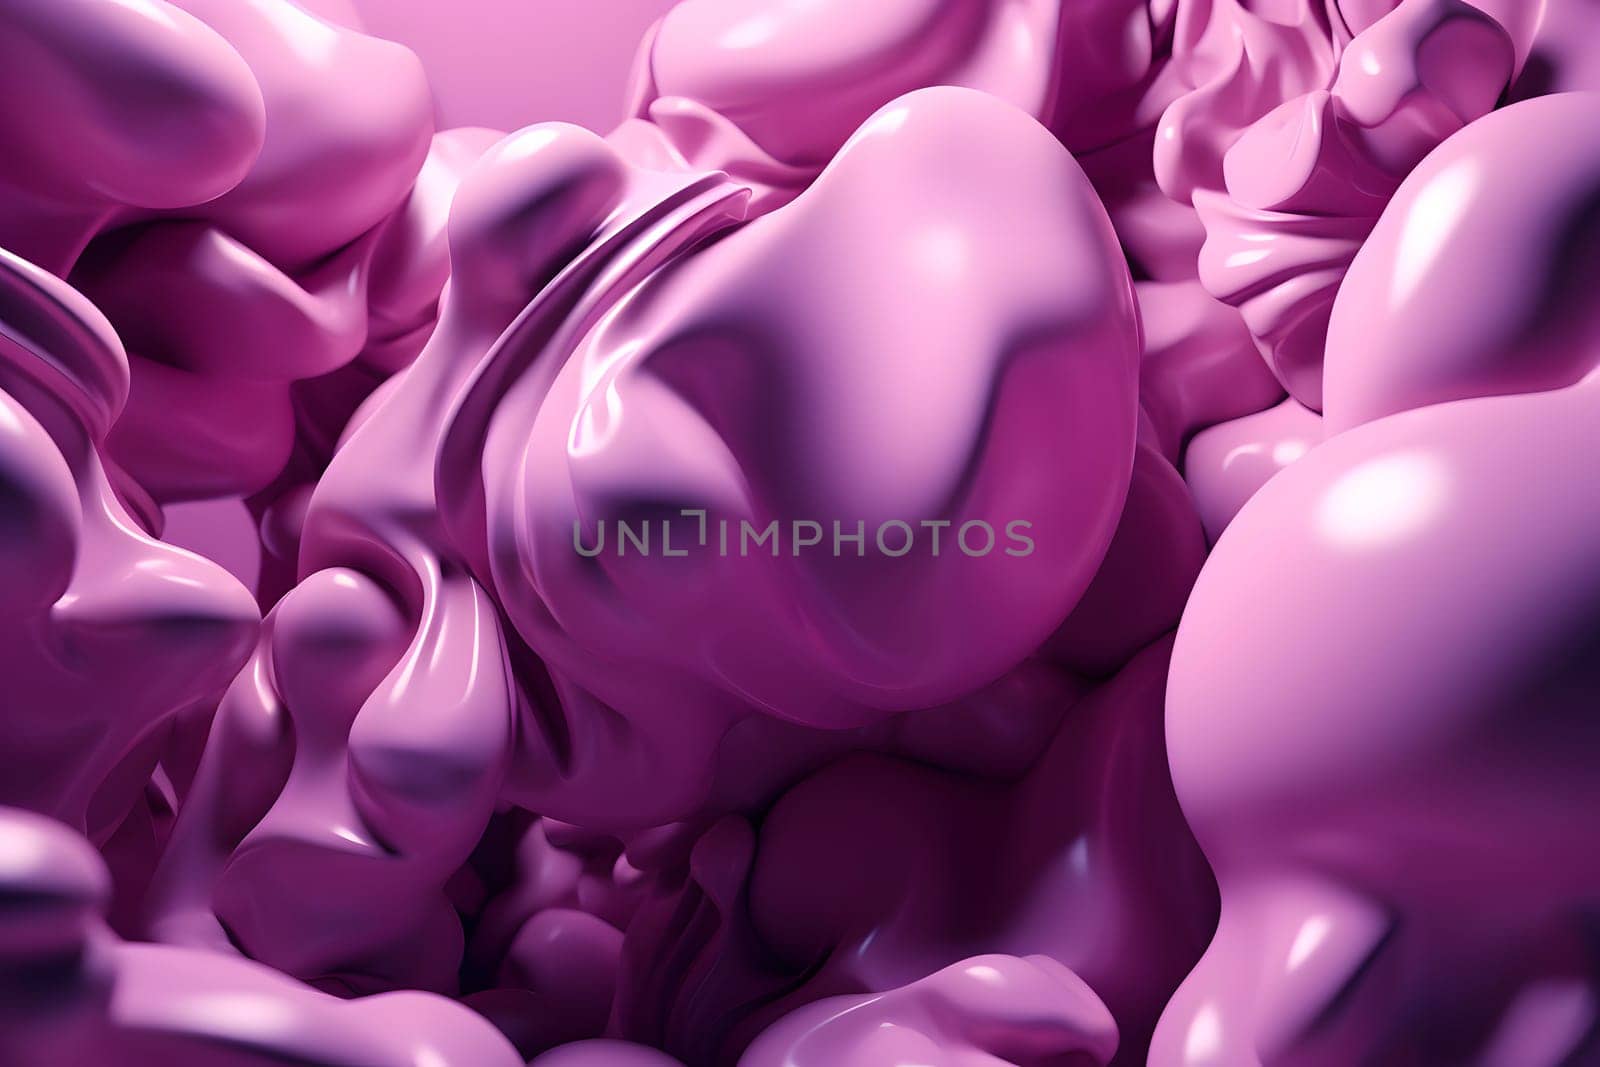 Abstract smooth shaped formless opaque pastel pink liquid flow background. Neural network generated in May 2023. Not based on any actual person, scene or pattern.